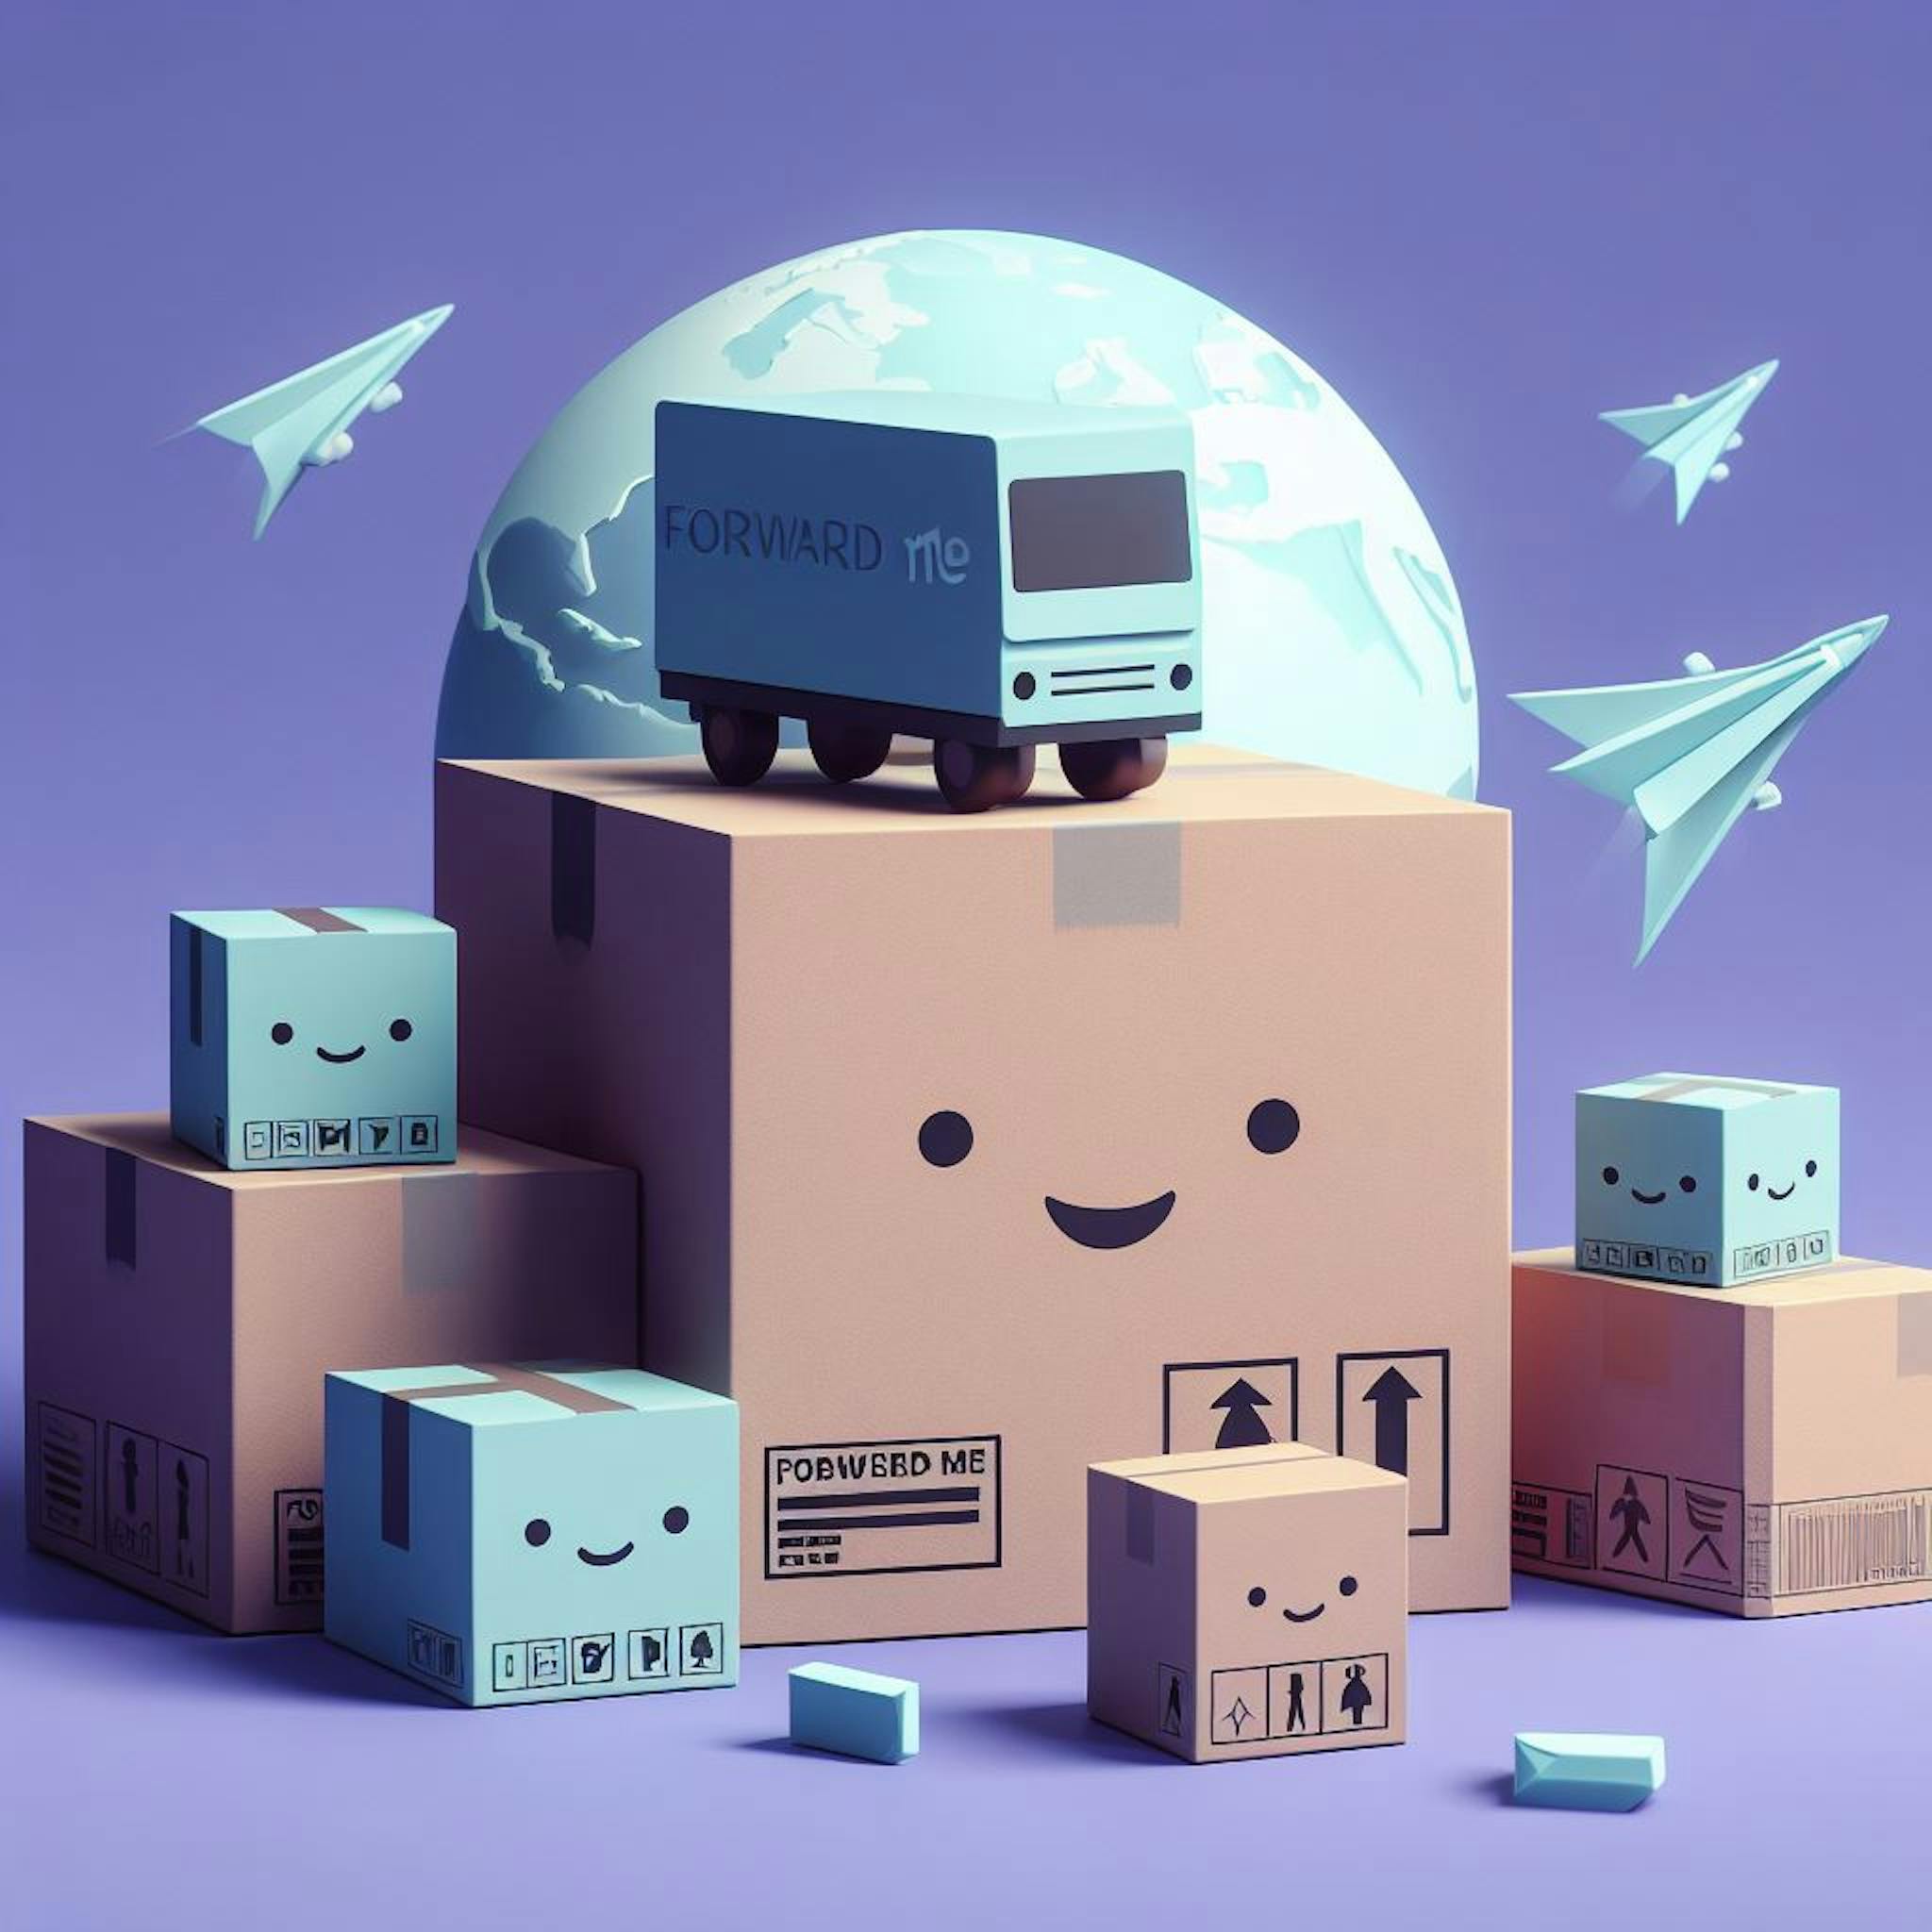 A lot of shipping packages piled up in a purple background with 3 planes. 